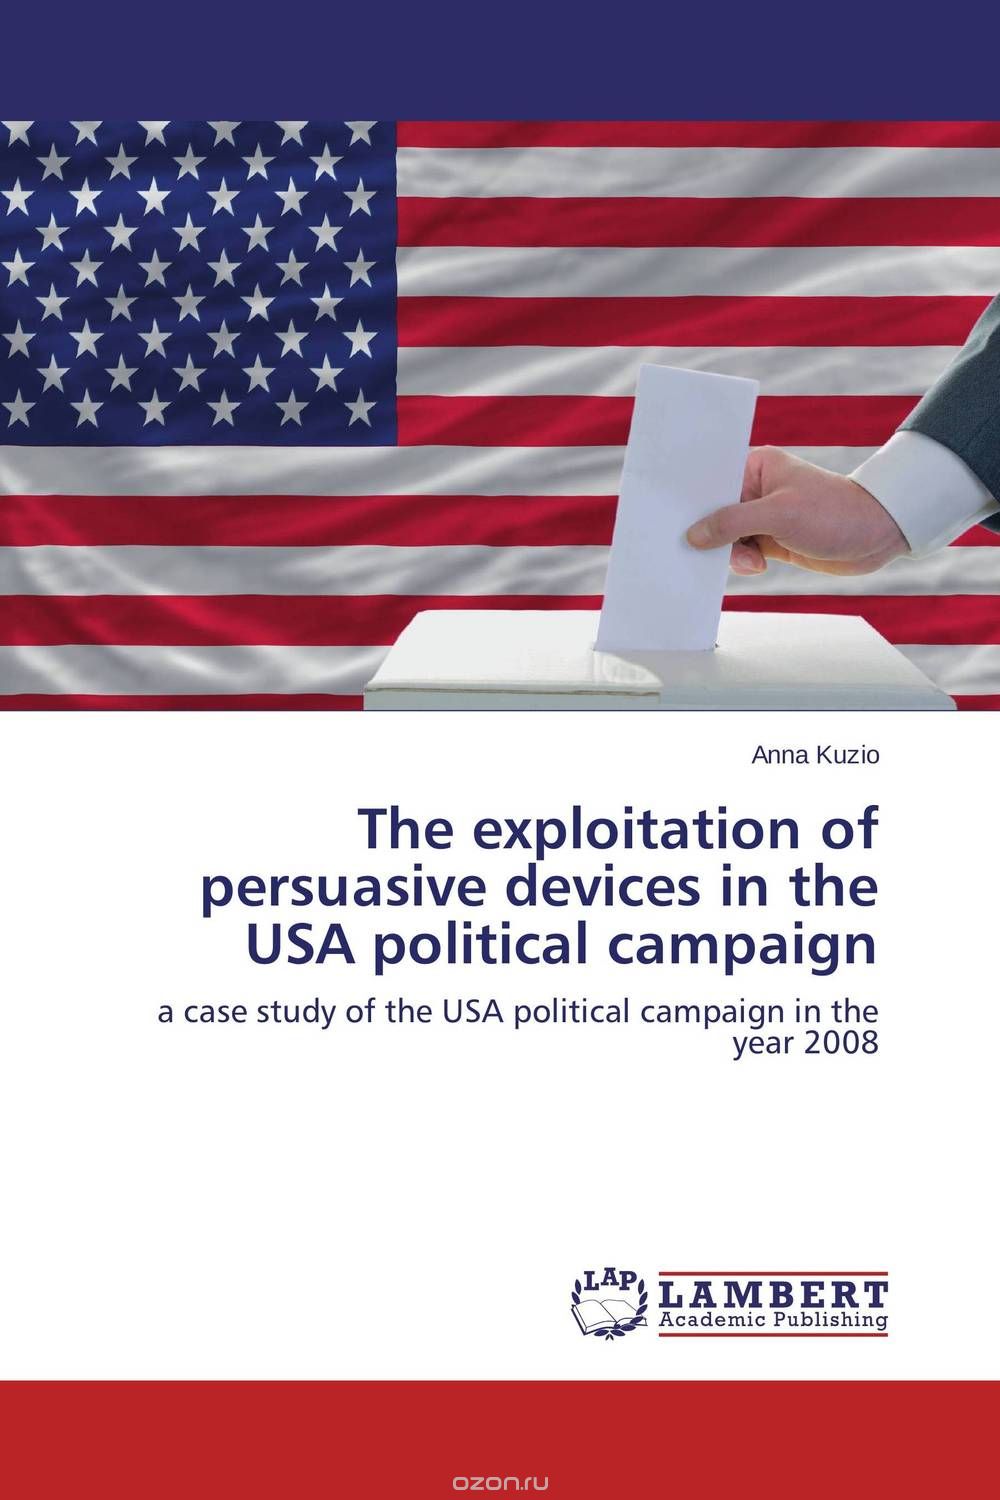 The exploitation of persuasive devices in the USA political campaign